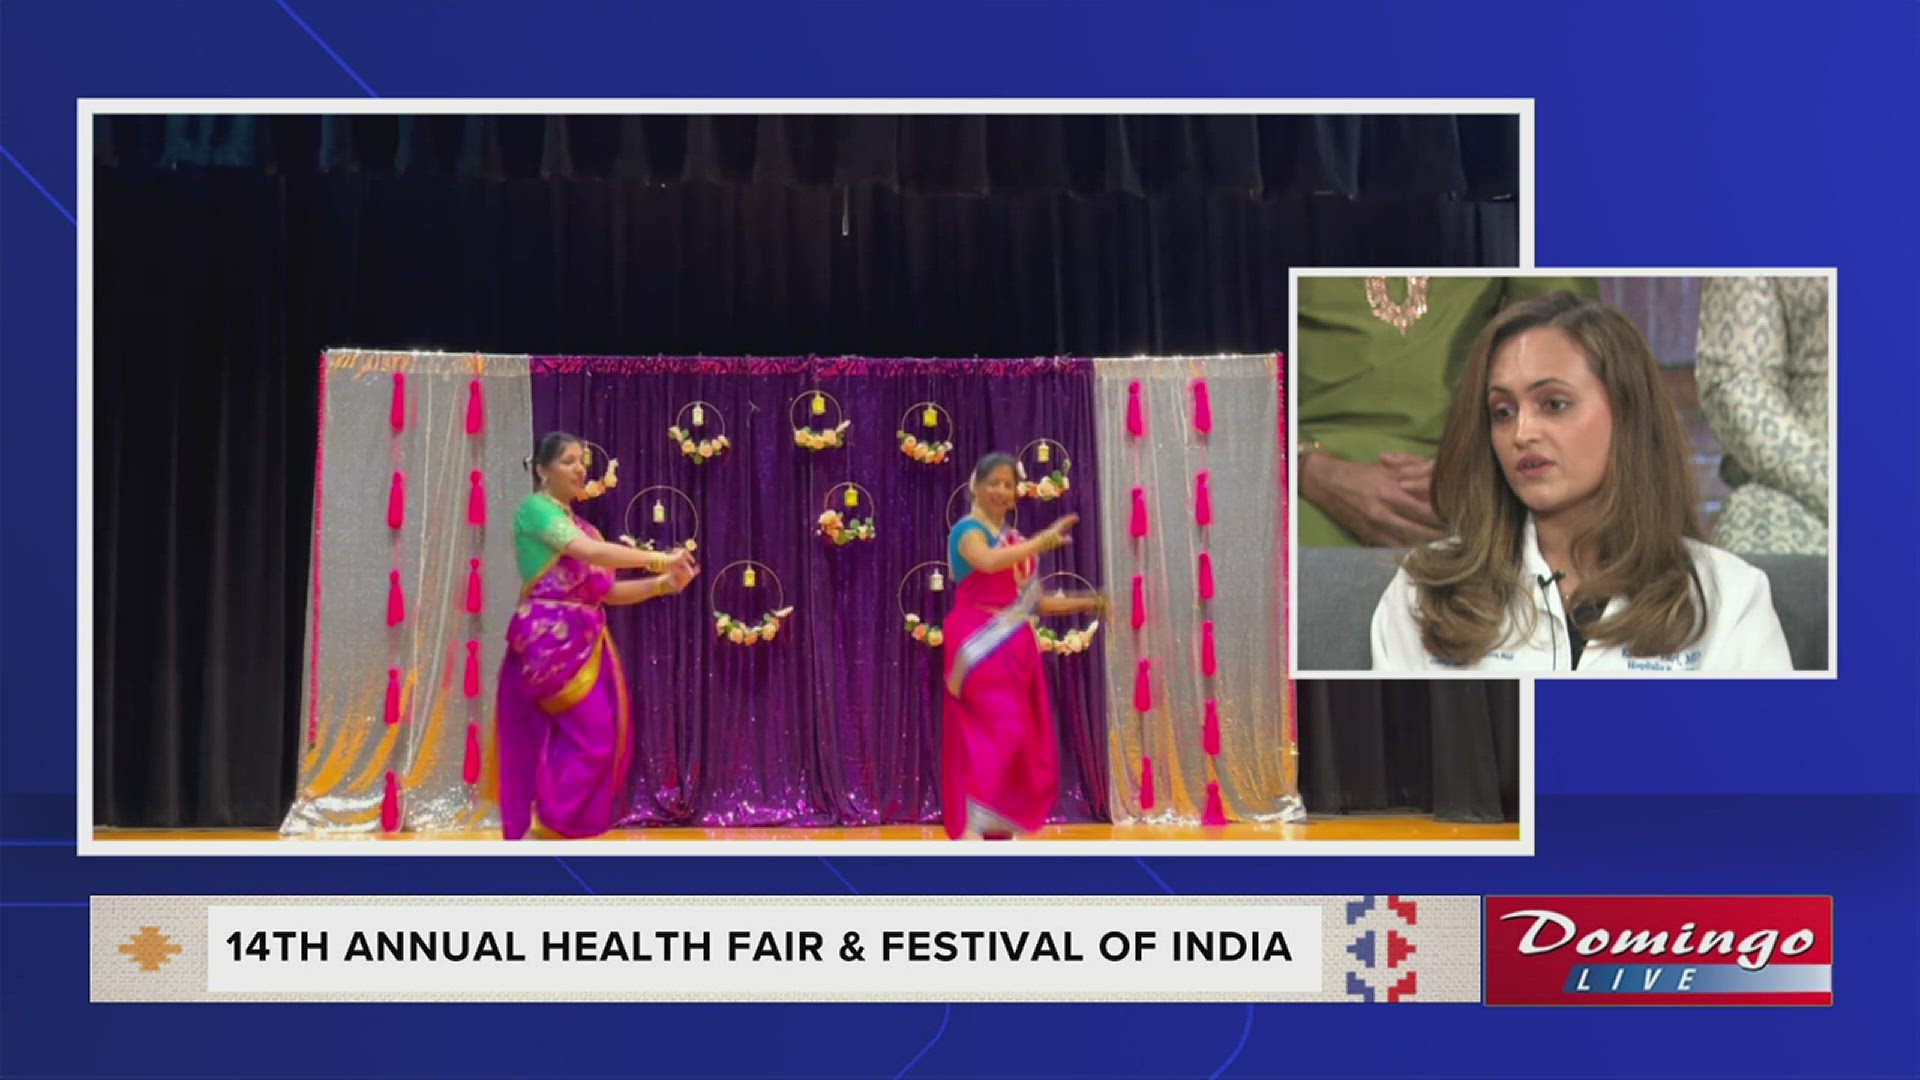 Organizers of the 14th Annual Health Fair & Festival of India joined us on Domingo Live to share their fest's origins and invite the public to the free event Dec. 2.